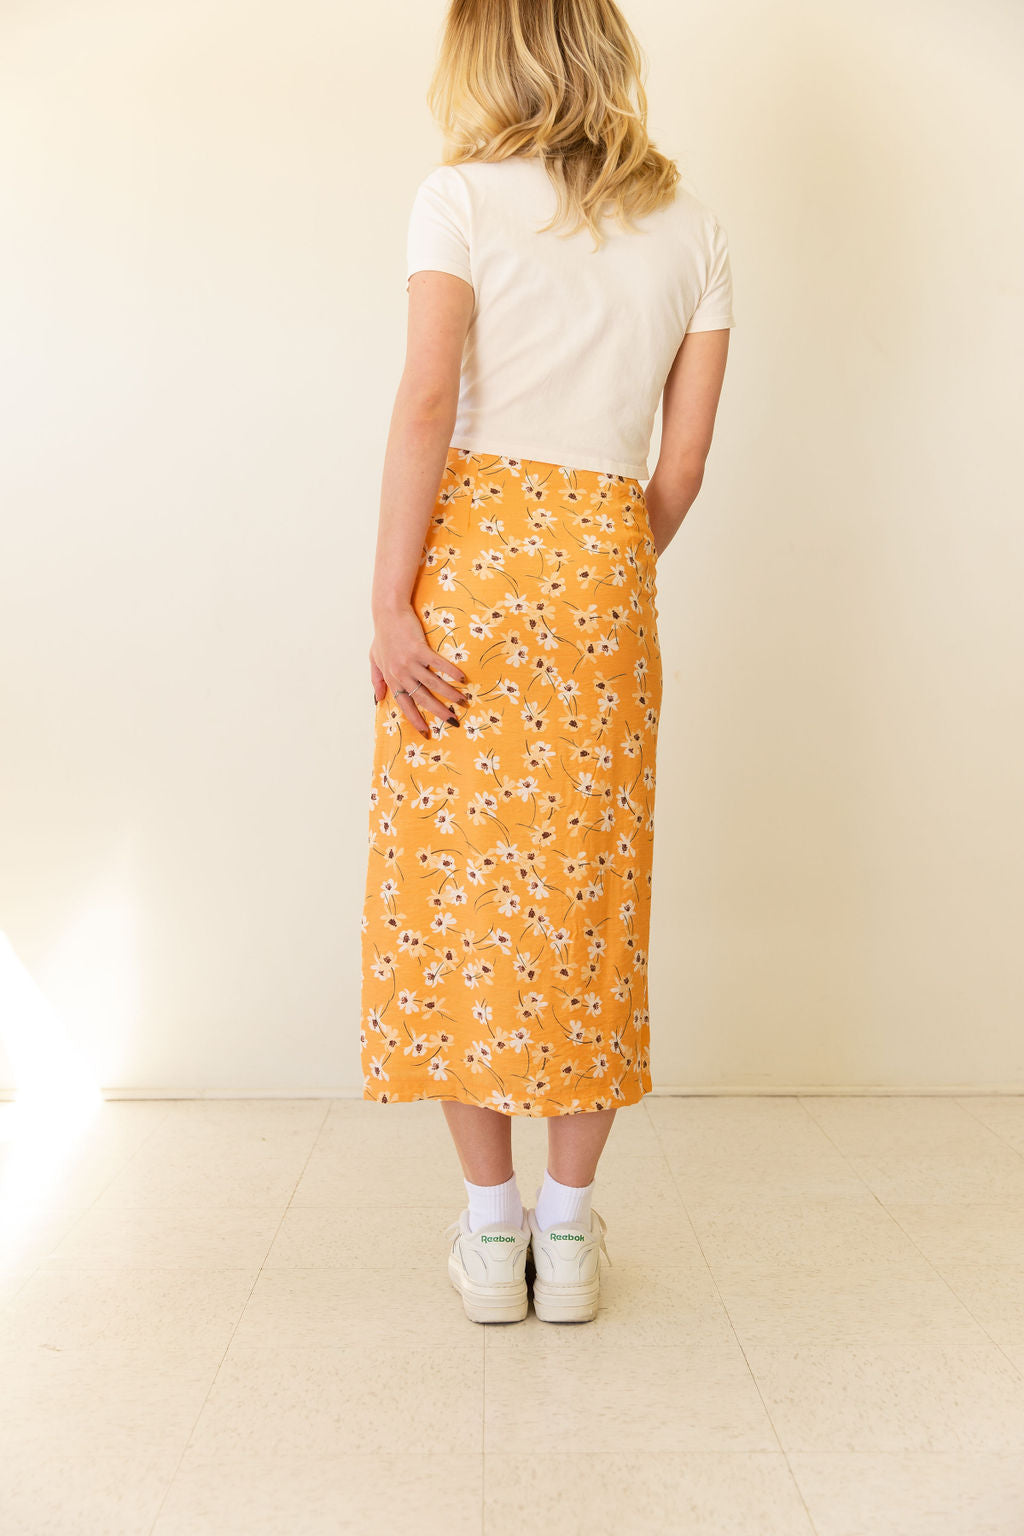 We Want Floral Midi Skirt